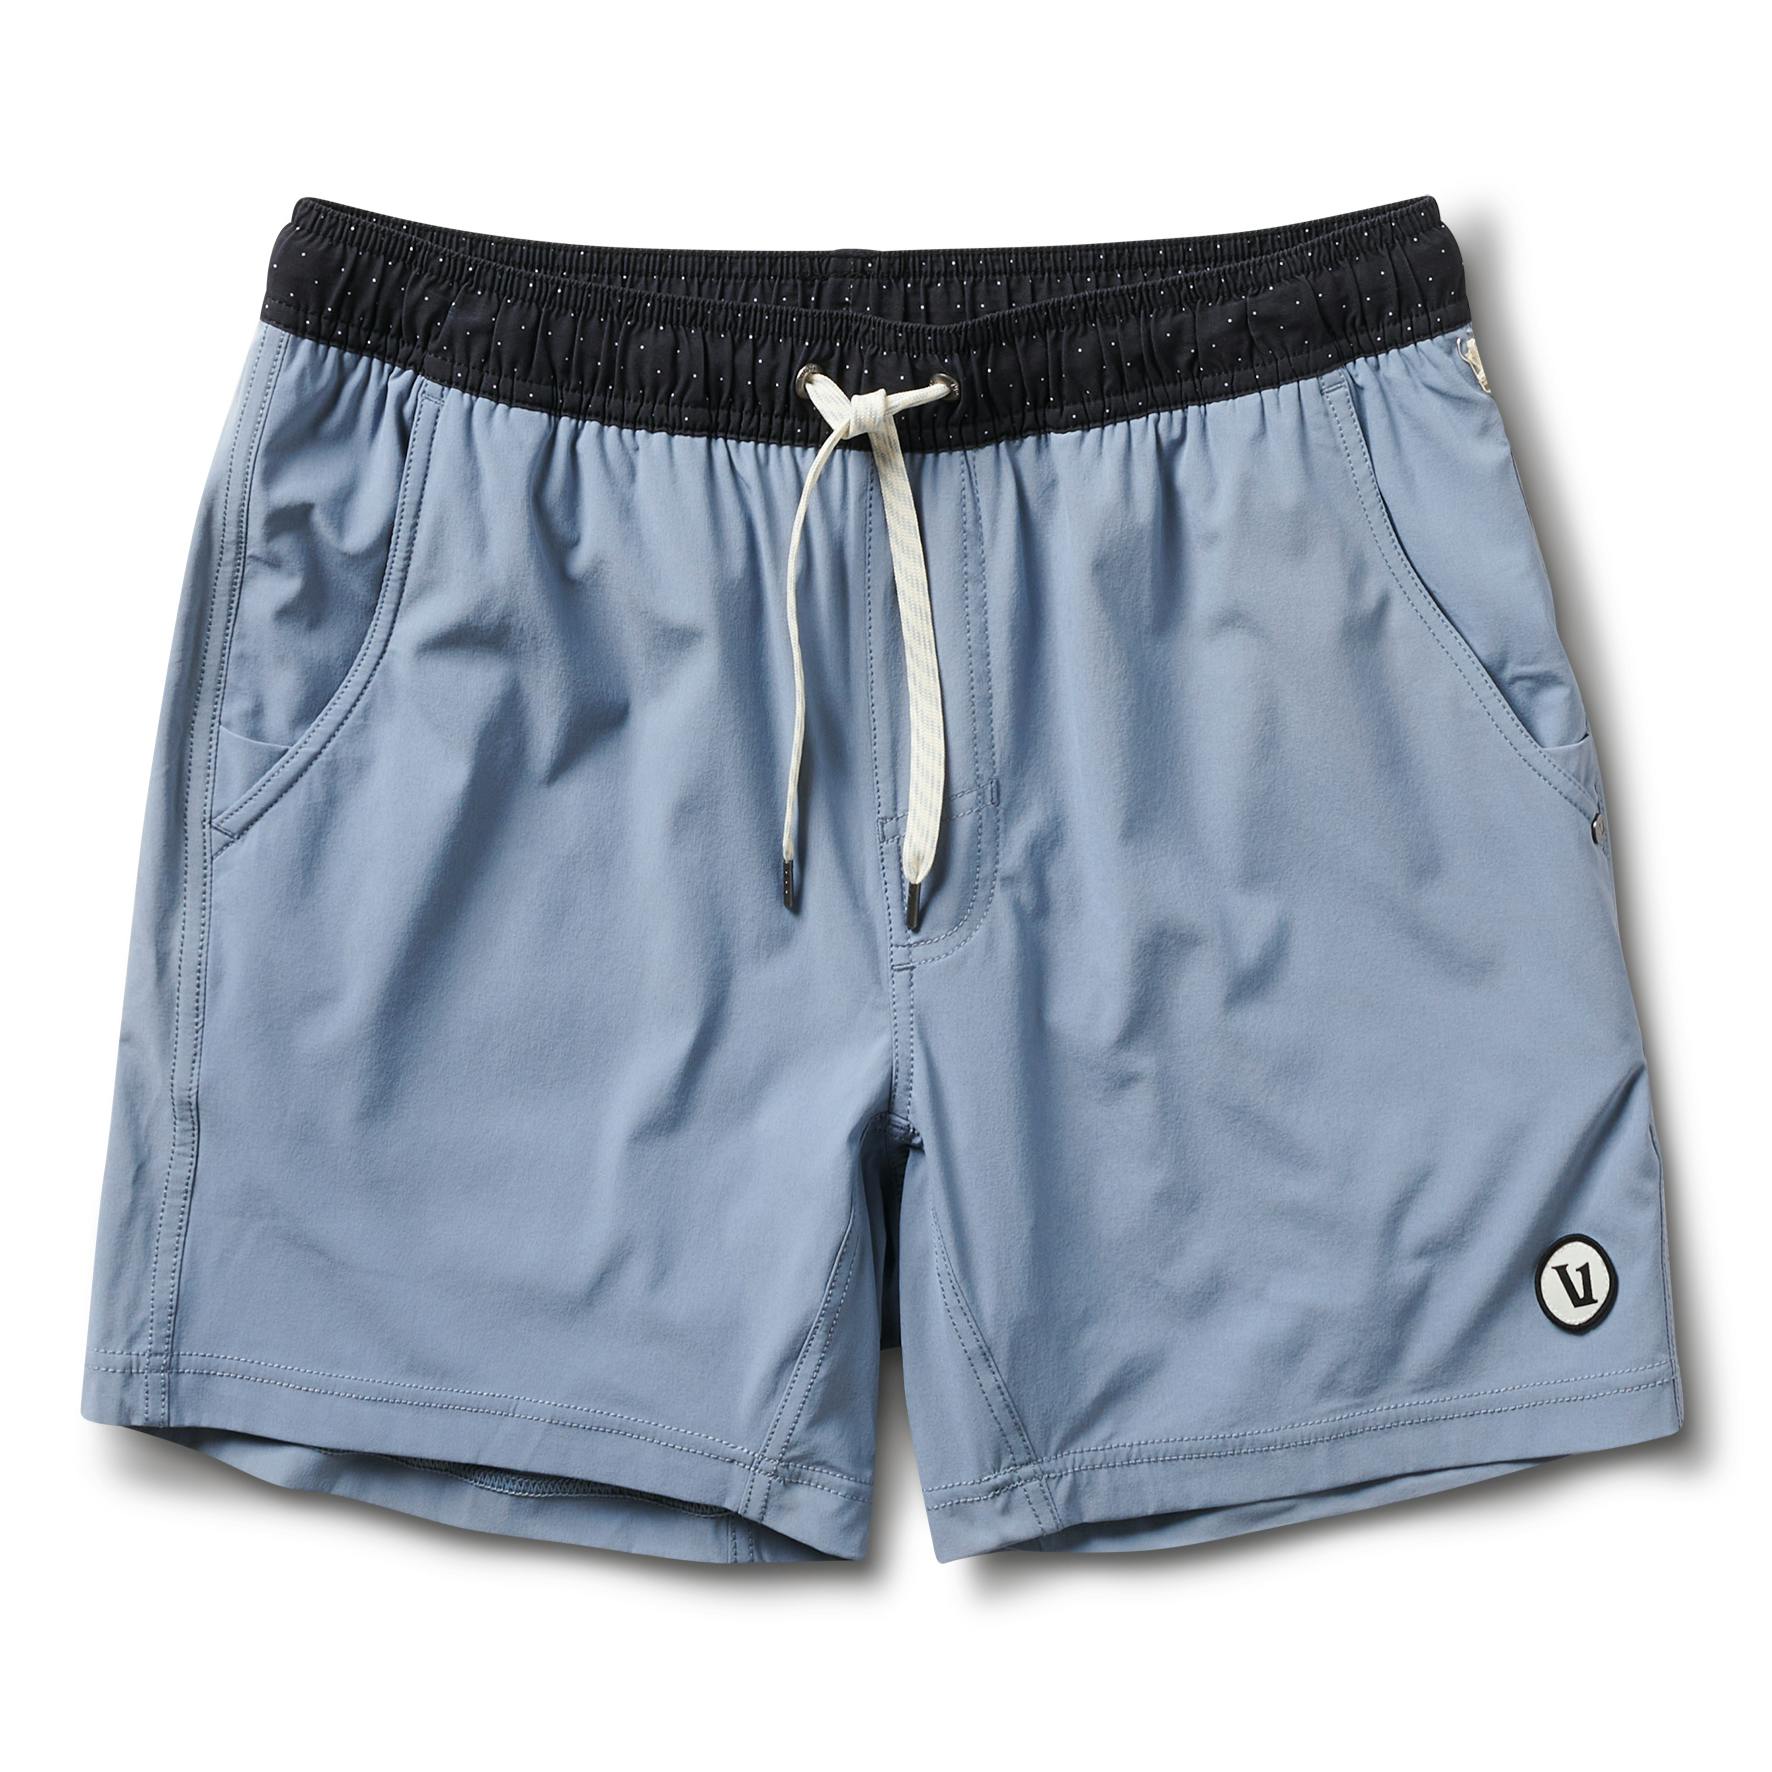 Kore Athletic Short - Lined 5"